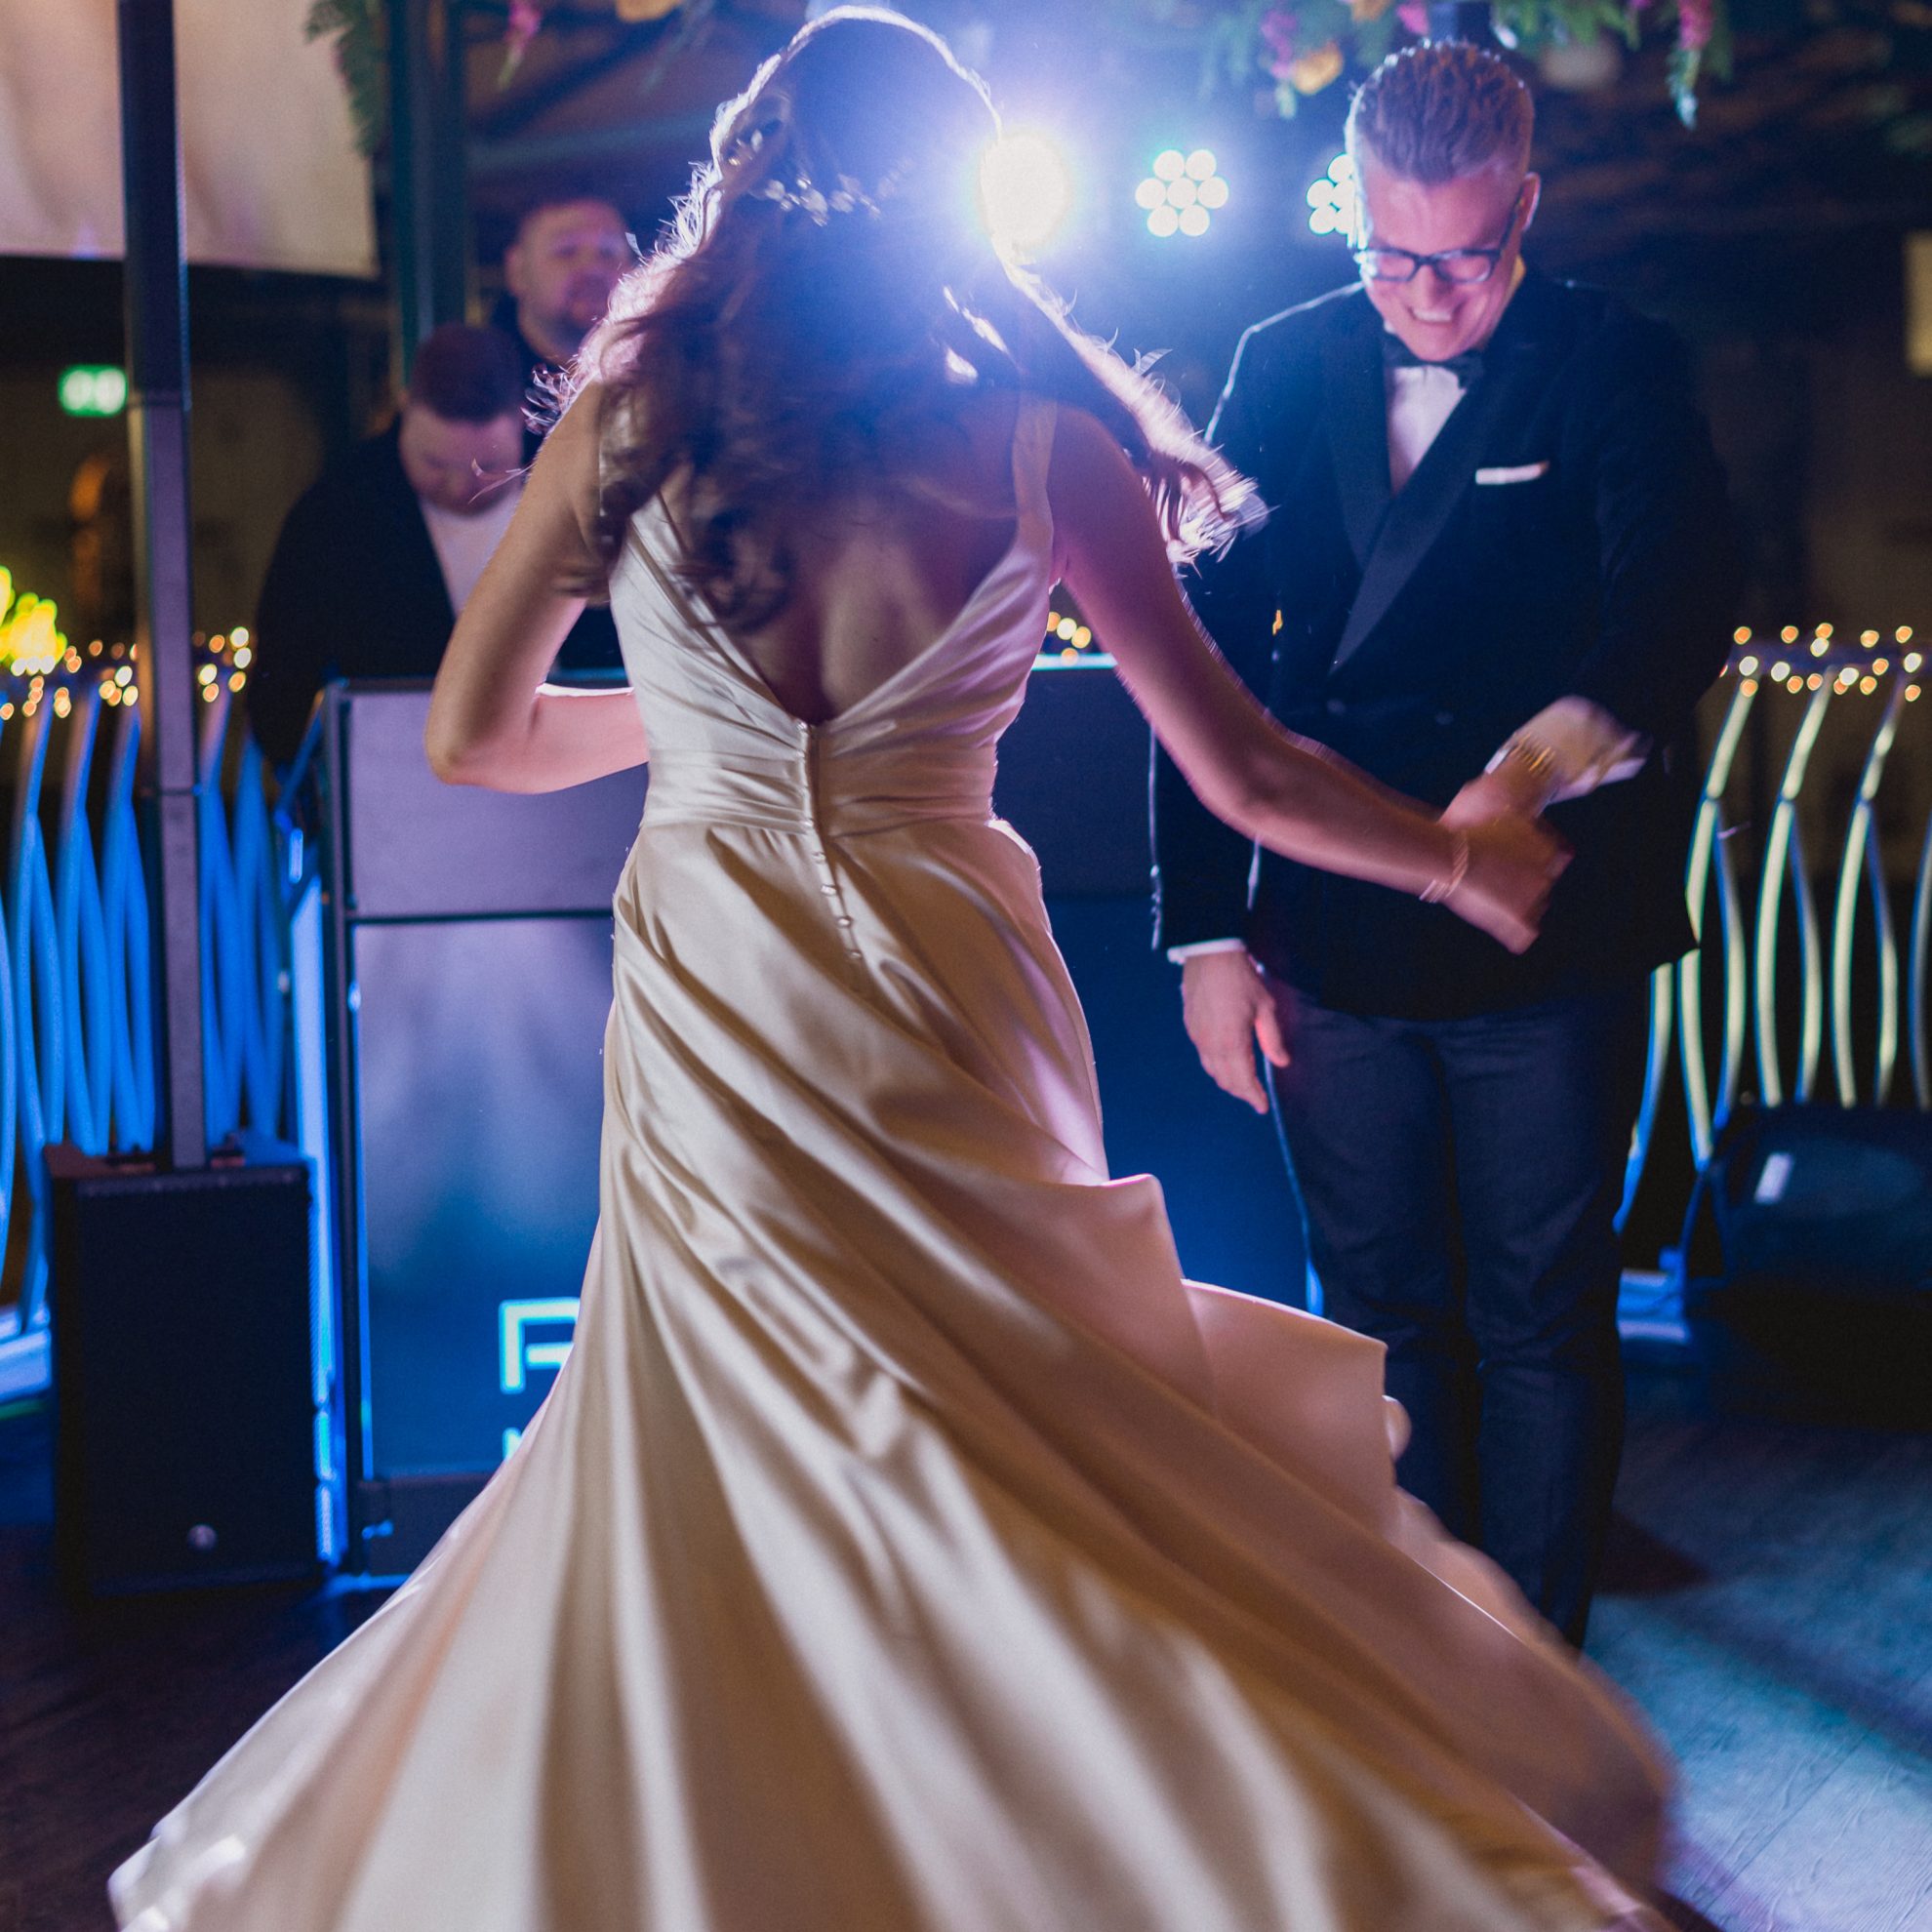 The bride and groom's first dance